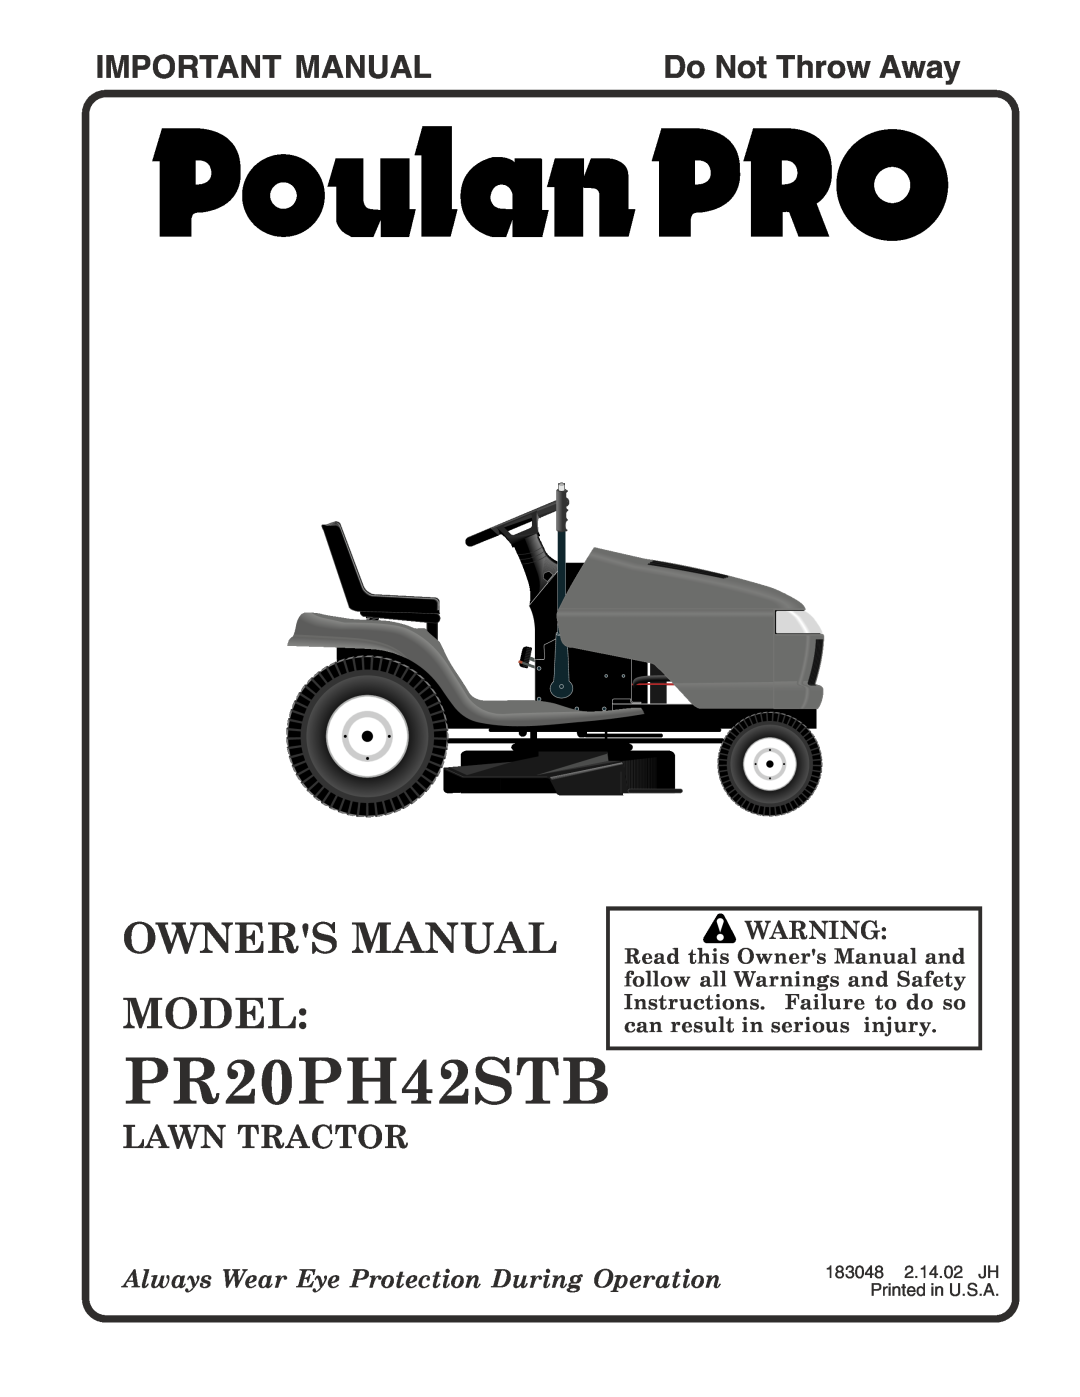 Poulan PR20PH42STB owner manual Important Manual, Do Not Throw Away, Lawn Tractor 